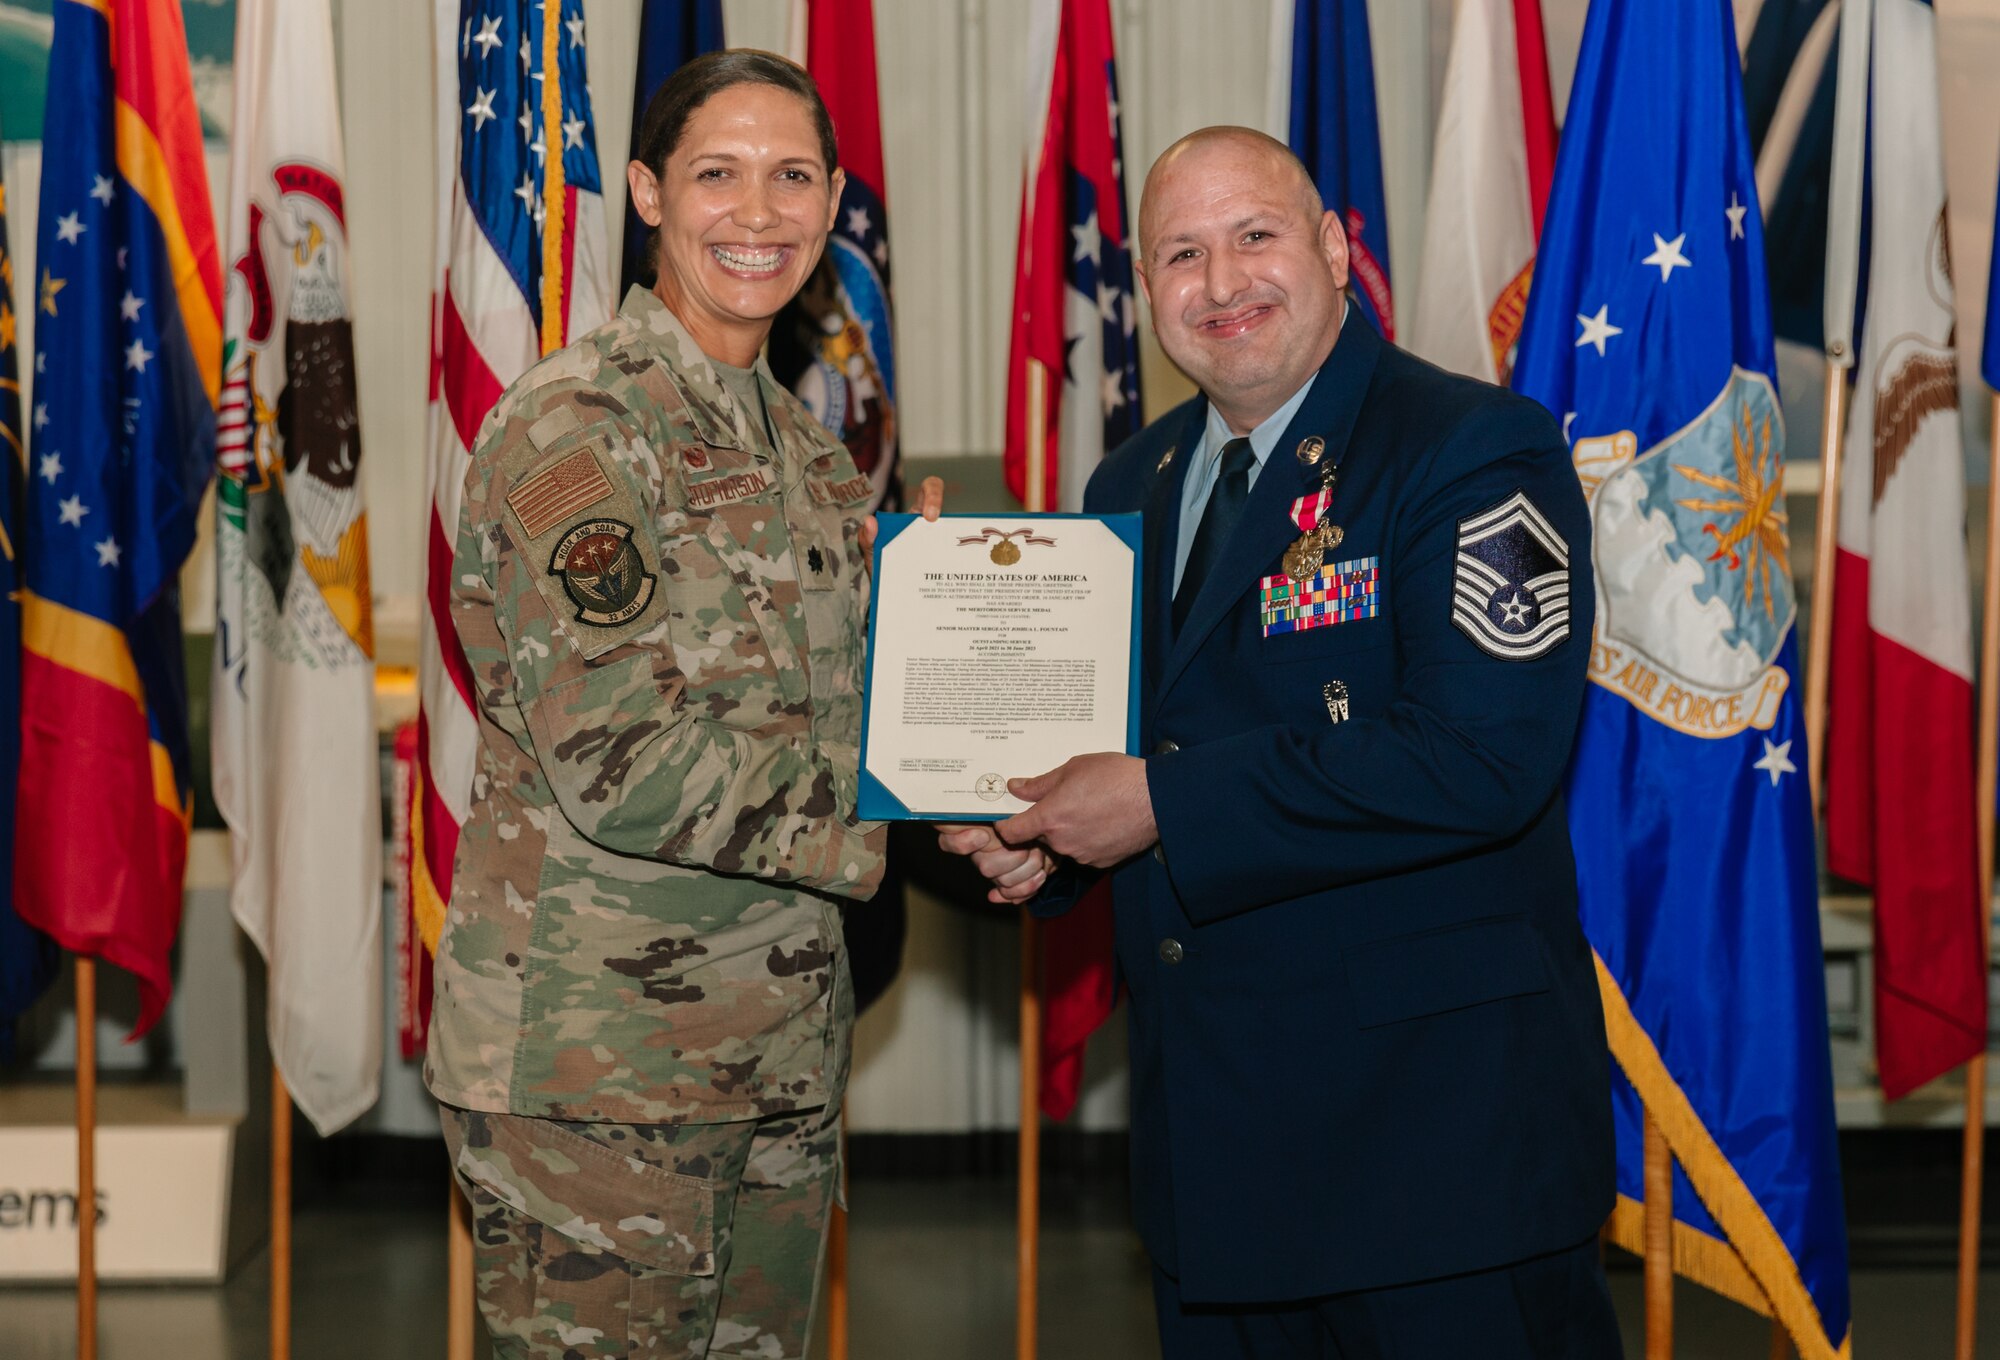 U.S. Air Force SMSgt Joshua Lee Fountain, a former 33rd Aircraft Maintenance Squadron weapons section chief, celebrates his career coming full circle thanks to the recruiter who helped him join twenty-one years ago.